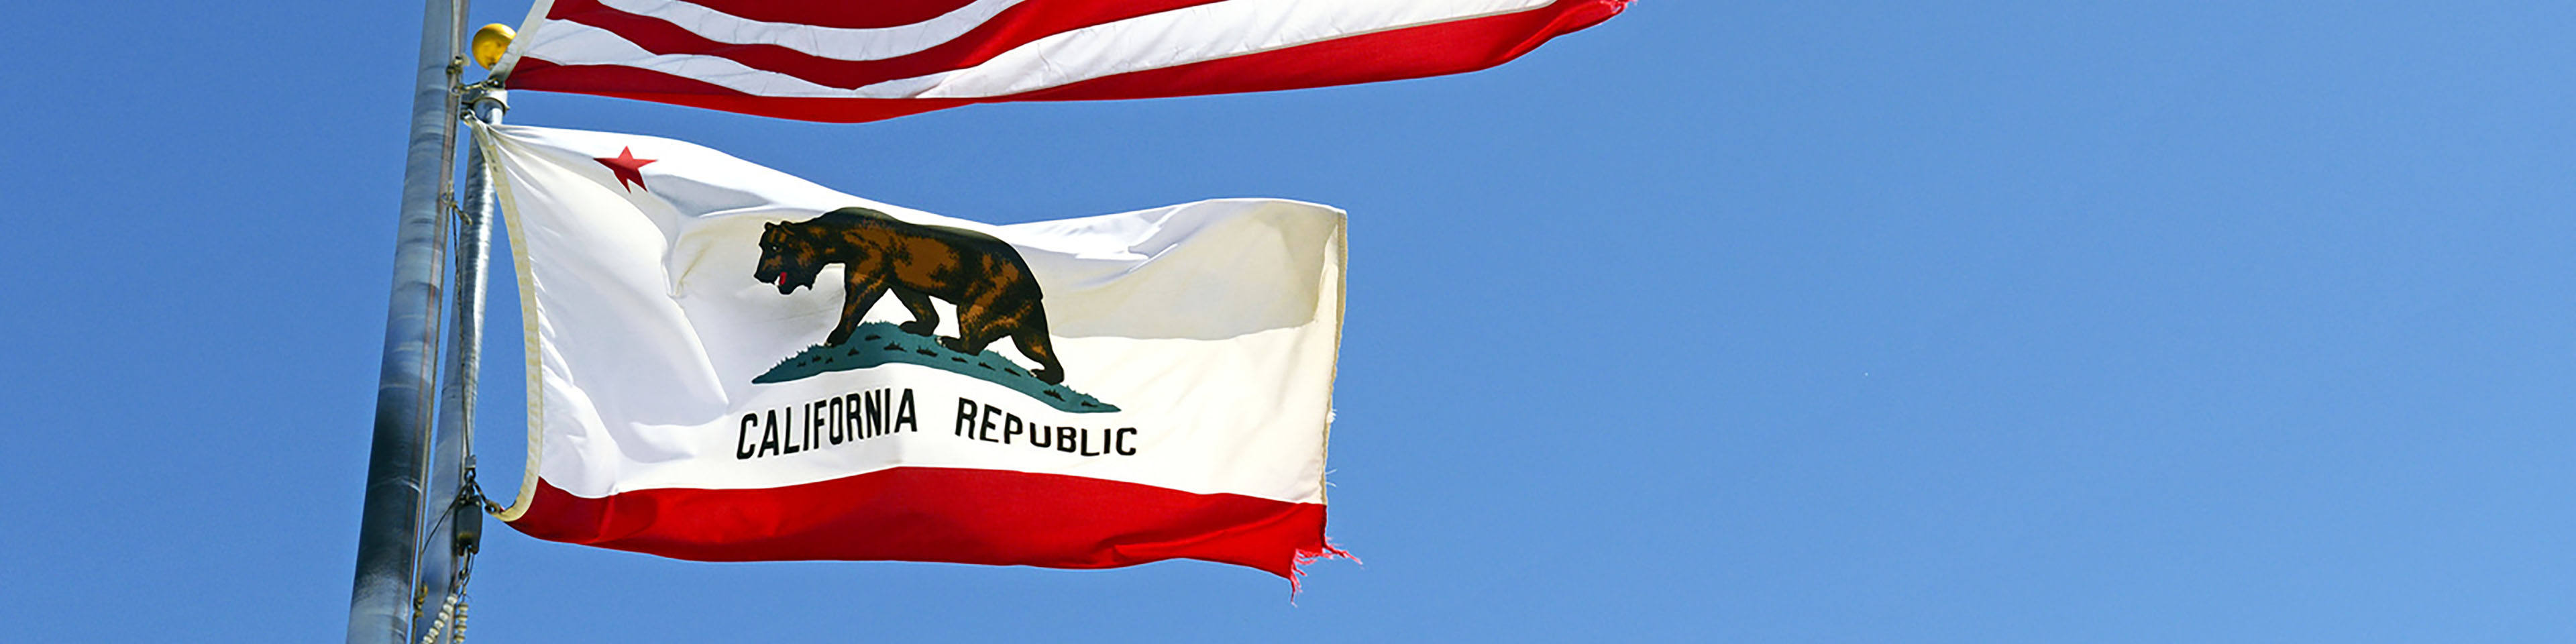 California provides tax credits for cannabis businesses